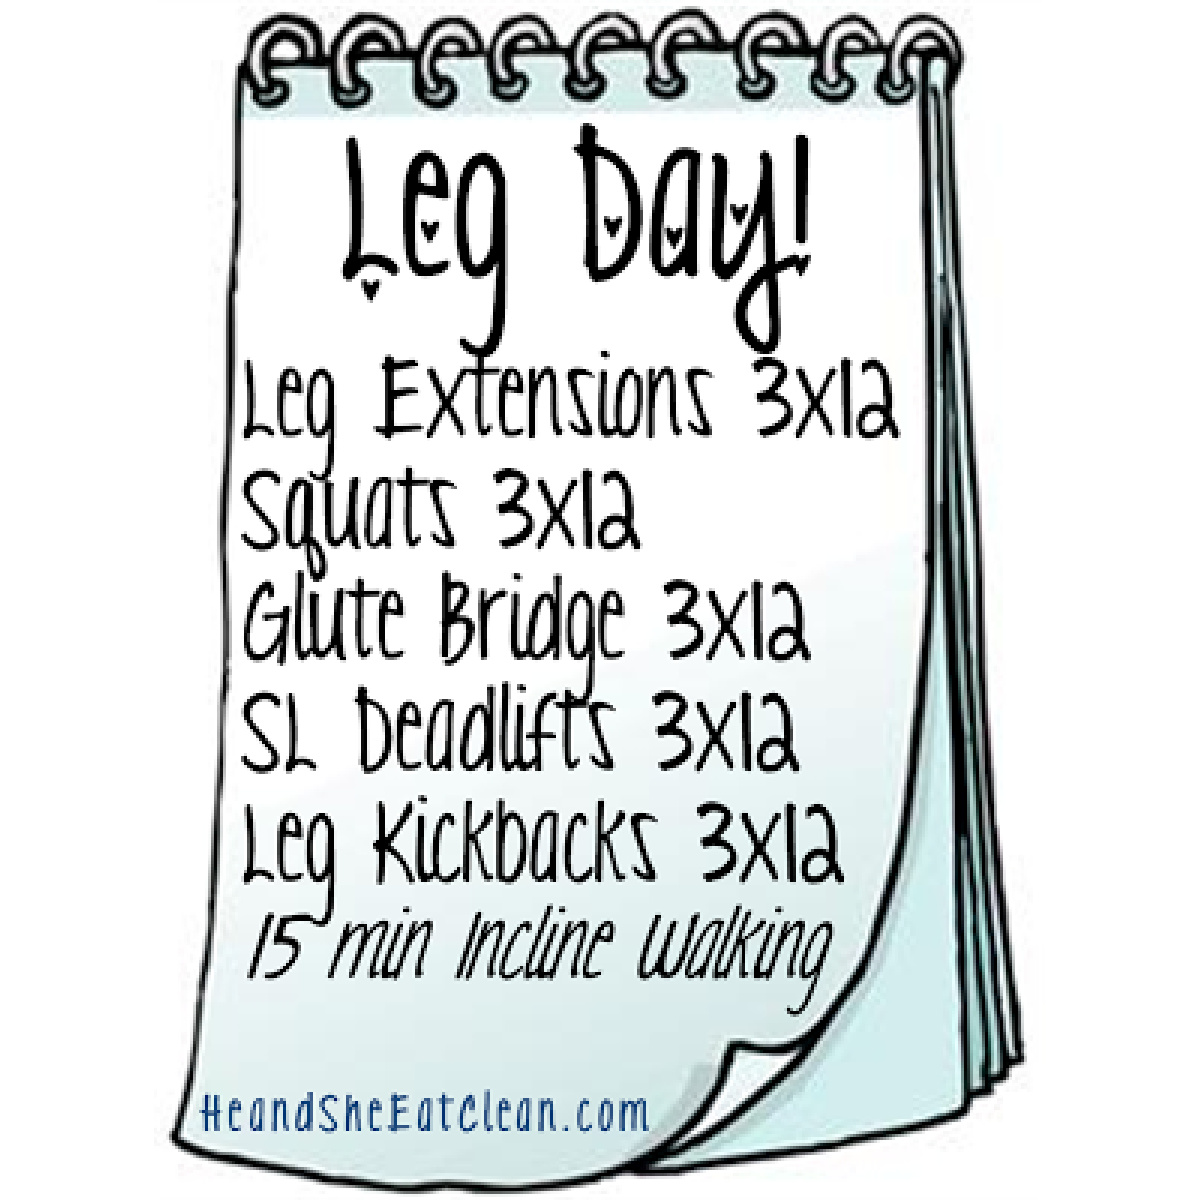 text reads Leg Day with workout listed